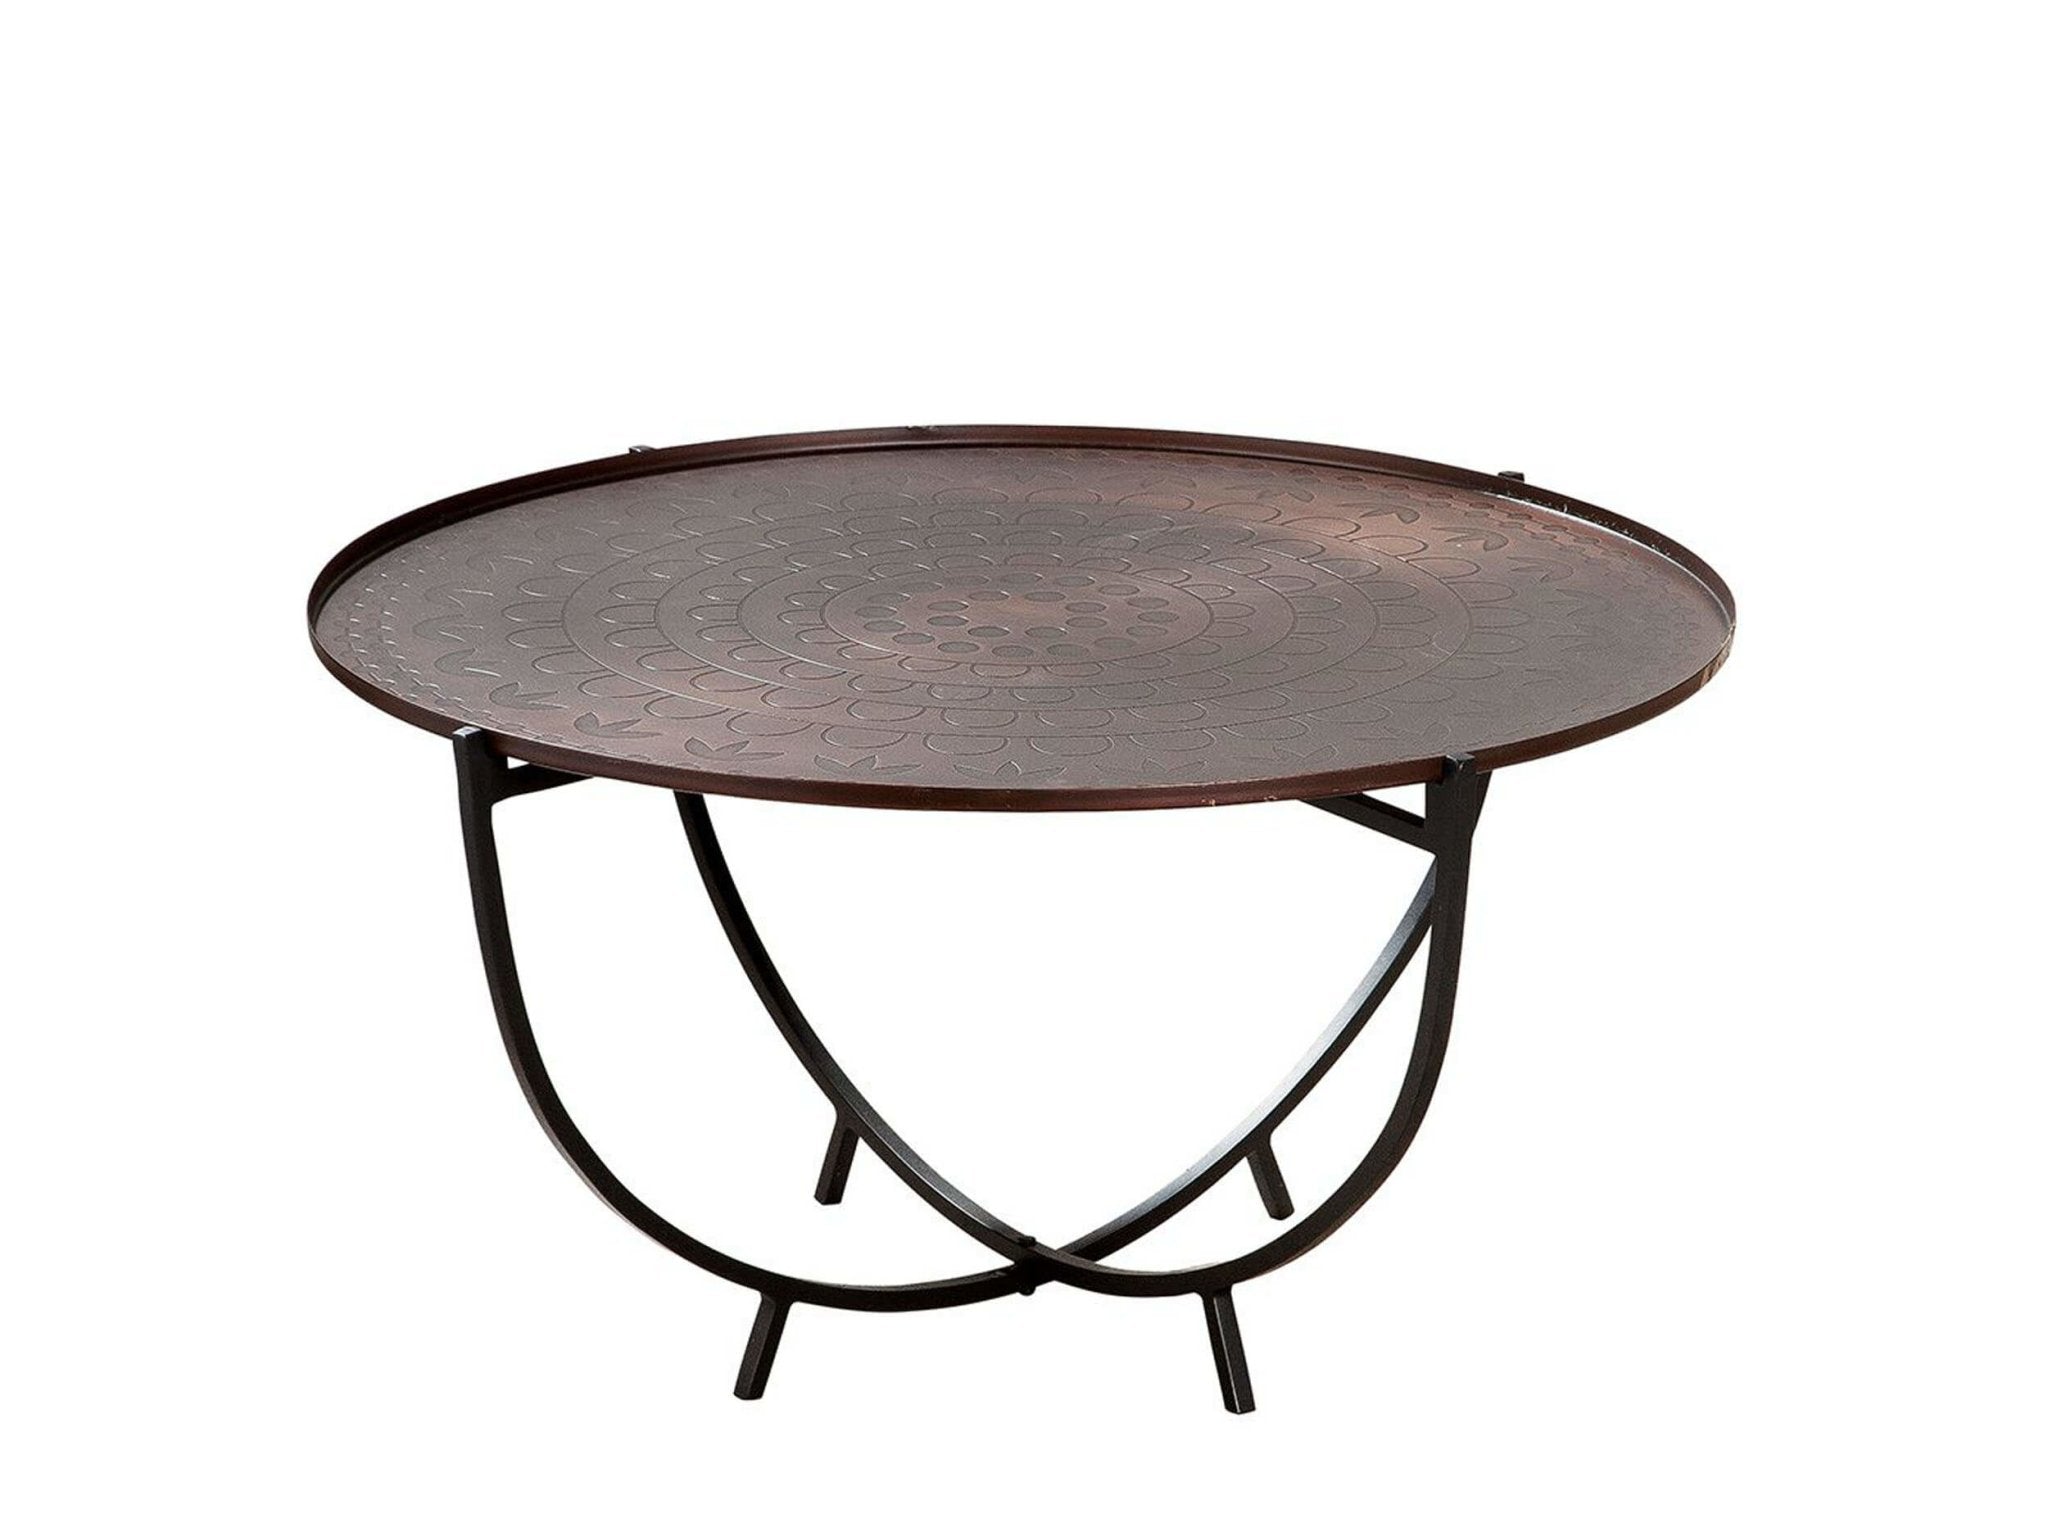 Round black coffee table with copper colored top | Chakki | diameter 72 cm